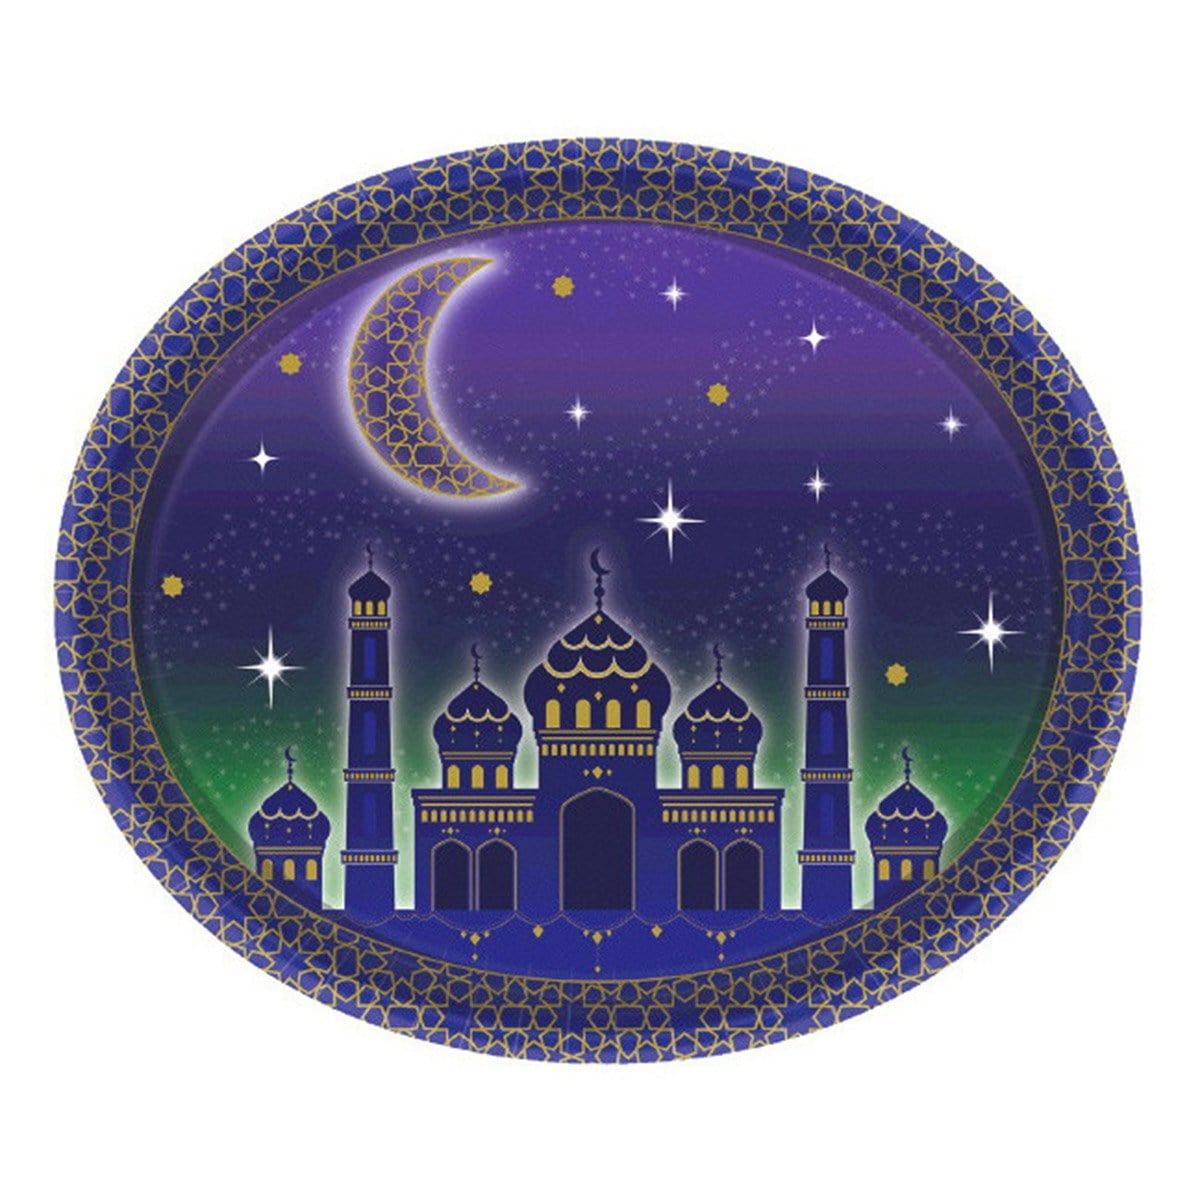 Buy Eid Eid Celebration - Plates 12 in. 8/pkg sold at Party Expert